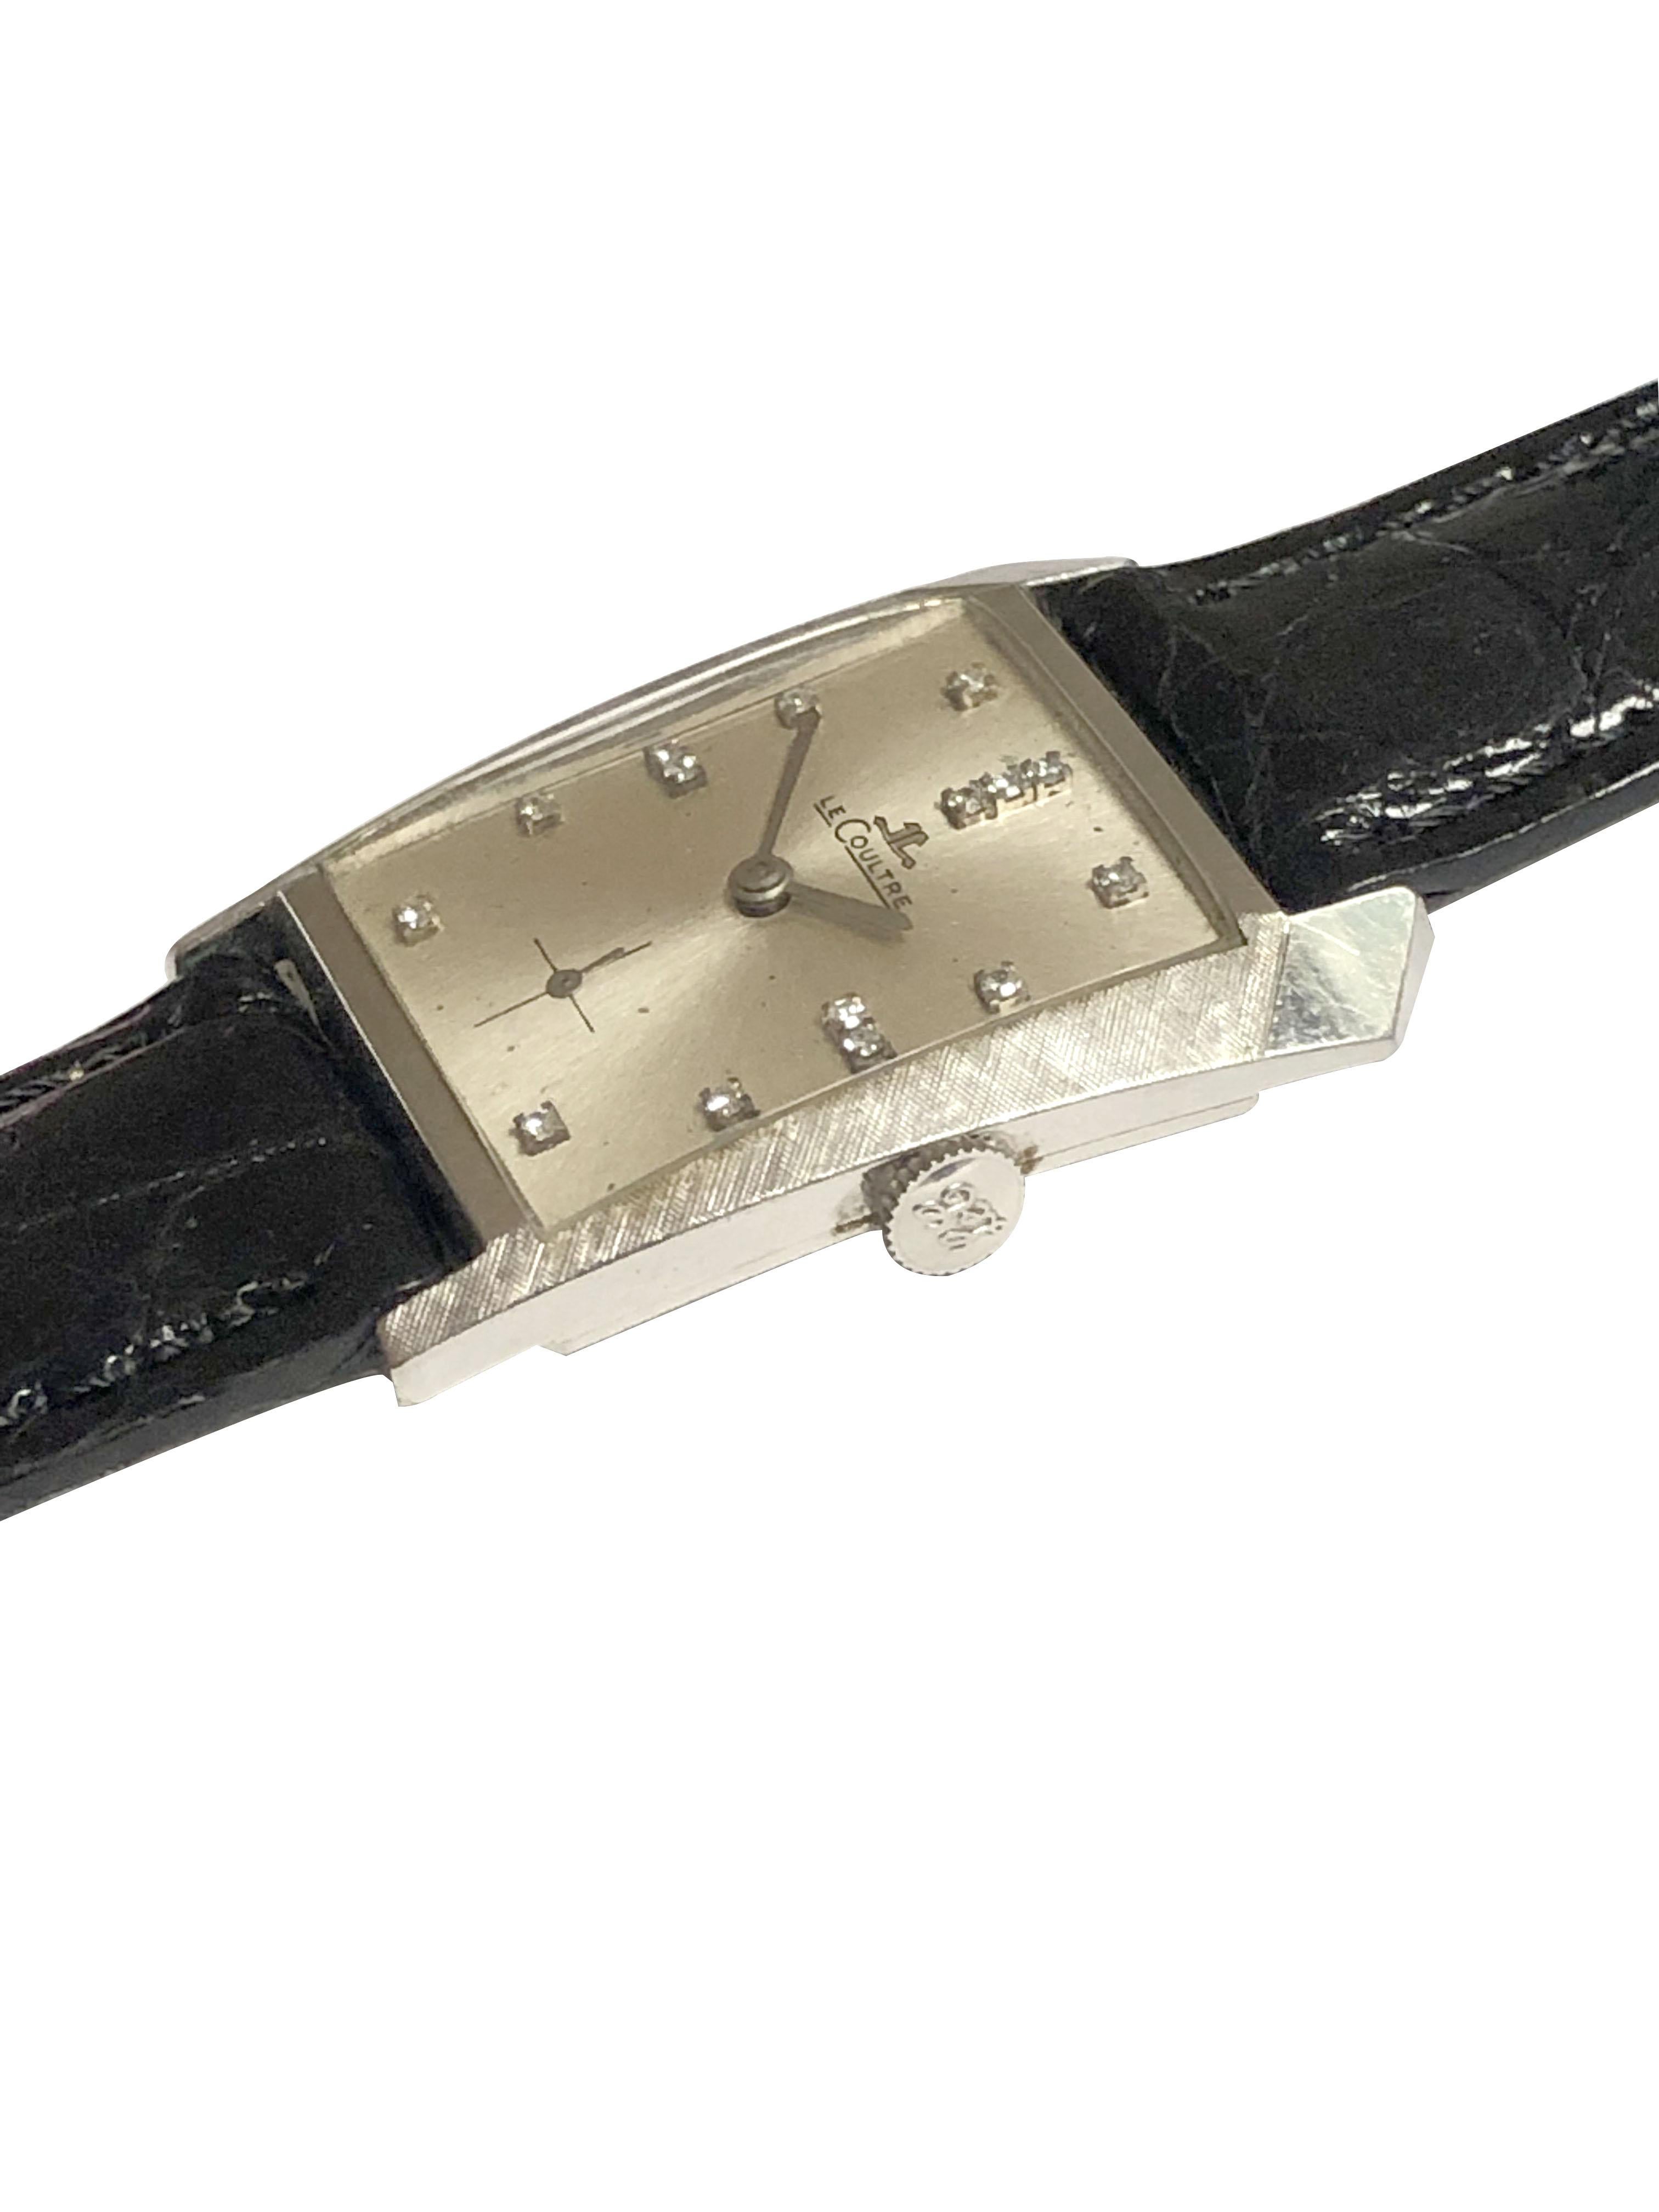 Circa 1960s LeCoultre Wrist Watch, 14K White Gold Asymmetrical 2 piece case measuring 34 X 17 M.M with Factory textured finish to the case top. LeCoultre 17 Jewel, mechanical, manual wind movement. Silver Satin Dial with Diamond set markers and a